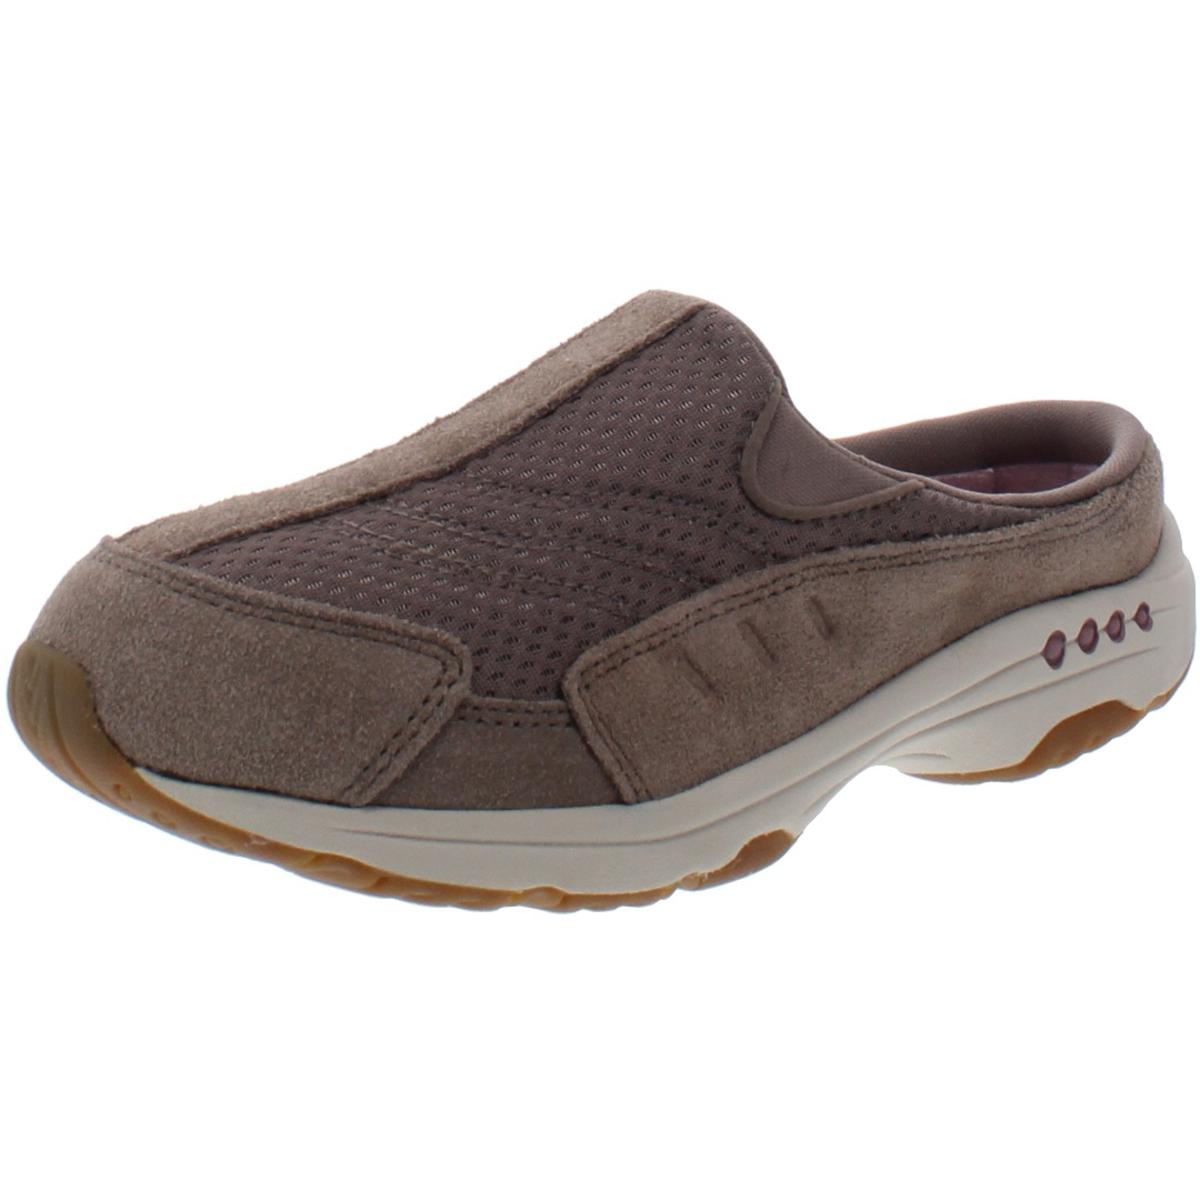 EASY SPIRIT TRAVEL TIME 266 MULE CLOGS